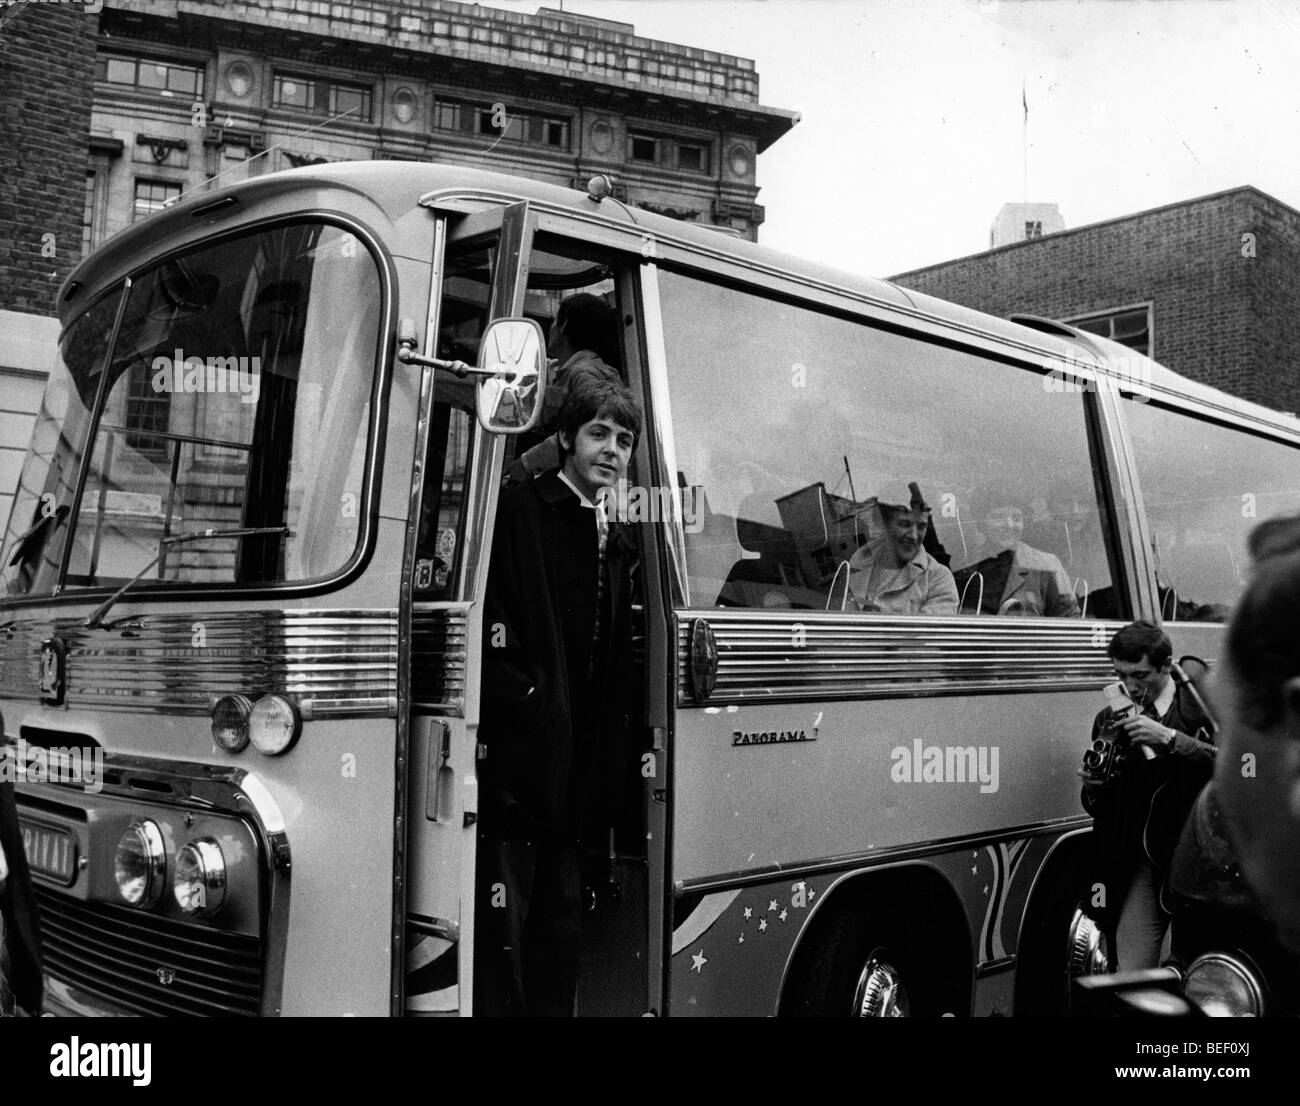 Singer Paul McCartney with 'Magical Mystery Tour' bus Stock Photo